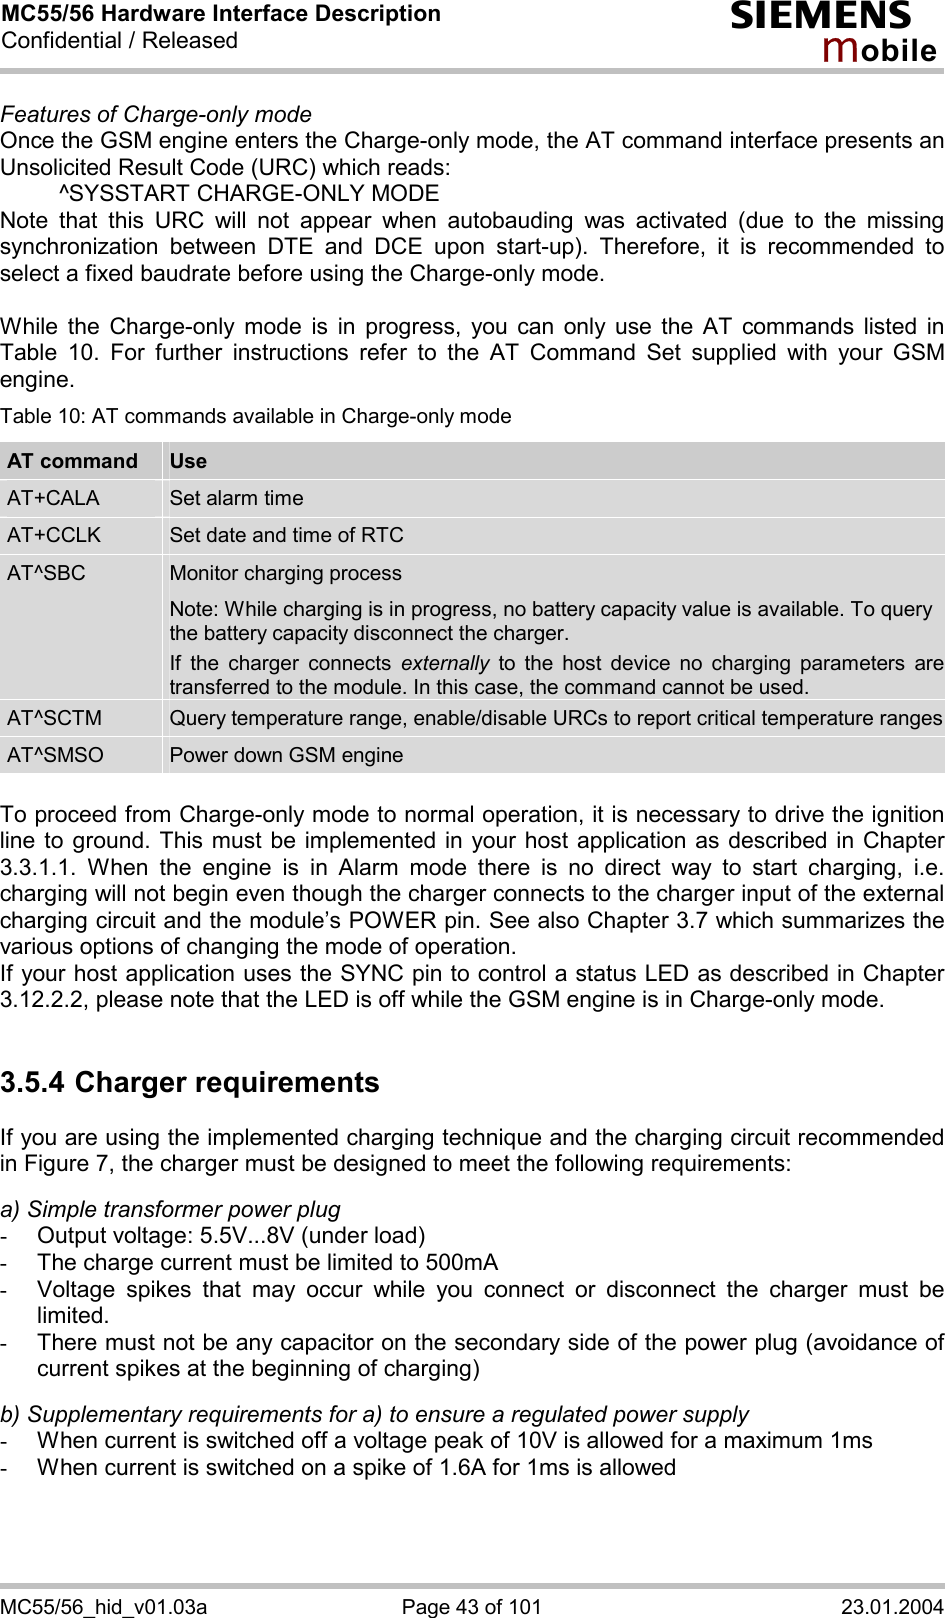 MC55/56 Hardware Interface Description Confidential / Released s mo b i l e MC55/56_hid_v01.03a  Page 43 of 101  23.01.2004 Features of Charge-only mode Once the GSM engine enters the Charge-only mode, the AT command interface presents an Unsolicited Result Code (URC) which reads:   ^SYSSTART CHARGE-ONLY MODE Note that this URC will not appear when autobauding was activated (due to the missing synchronization between DTE and DCE upon start-up). Therefore, it is recommended to select a fixed baudrate before using the Charge-only mode.  While the Charge-only mode is in progress, you can only use the AT commands listed in Table 10. For further instructions refer to the AT Command Set supplied with your GSM engine. Table 10: AT commands available in Charge-only mode AT command  Use AT+CALA  Set alarm time AT+CCLK  Set date and time of RTC AT^SBC  Monitor charging process Note: While charging is in progress, no battery capacity value is available. To query the battery capacity disconnect the charger.  If the charger connects externally to the host device no charging parameters are transferred to the module. In this case, the command cannot be used. AT^SCTM  Query temperature range, enable/disable URCs to report critical temperature rangesAT^SMSO  Power down GSM engine  To proceed from Charge-only mode to normal operation, it is necessary to drive the ignition line to ground. This must be implemented in your host application as described in Chapter 3.3.1.1. When the engine is in Alarm mode there is no direct way to start charging, i.e. charging will not begin even though the charger connects to the charger input of the external charging circuit and the module’s POWER pin. See also Chapter 3.7 which summarizes the various options of changing the mode of operation. If your host application uses the SYNC pin to control a status LED as described in Chapter 3.12.2.2, please note that the LED is off while the GSM engine is in Charge-only mode.  3.5.4 Charger requirements If you are using the implemented charging technique and the charging circuit recommended in Figure 7, the charger must be designed to meet the following requirements:   a) Simple transformer power plug -  Output voltage: 5.5V...8V (under load) -  The charge current must be limited to 500mA -  Voltage spikes that may occur while you connect or disconnect the charger must be limited. -  There must not be any capacitor on the secondary side of the power plug (avoidance of current spikes at the beginning of charging)  b) Supplementary requirements for a) to ensure a regulated power supply  -  When current is switched off a voltage peak of 10V is allowed for a maximum 1ms -  When current is switched on a spike of 1.6A for 1ms is allowed  